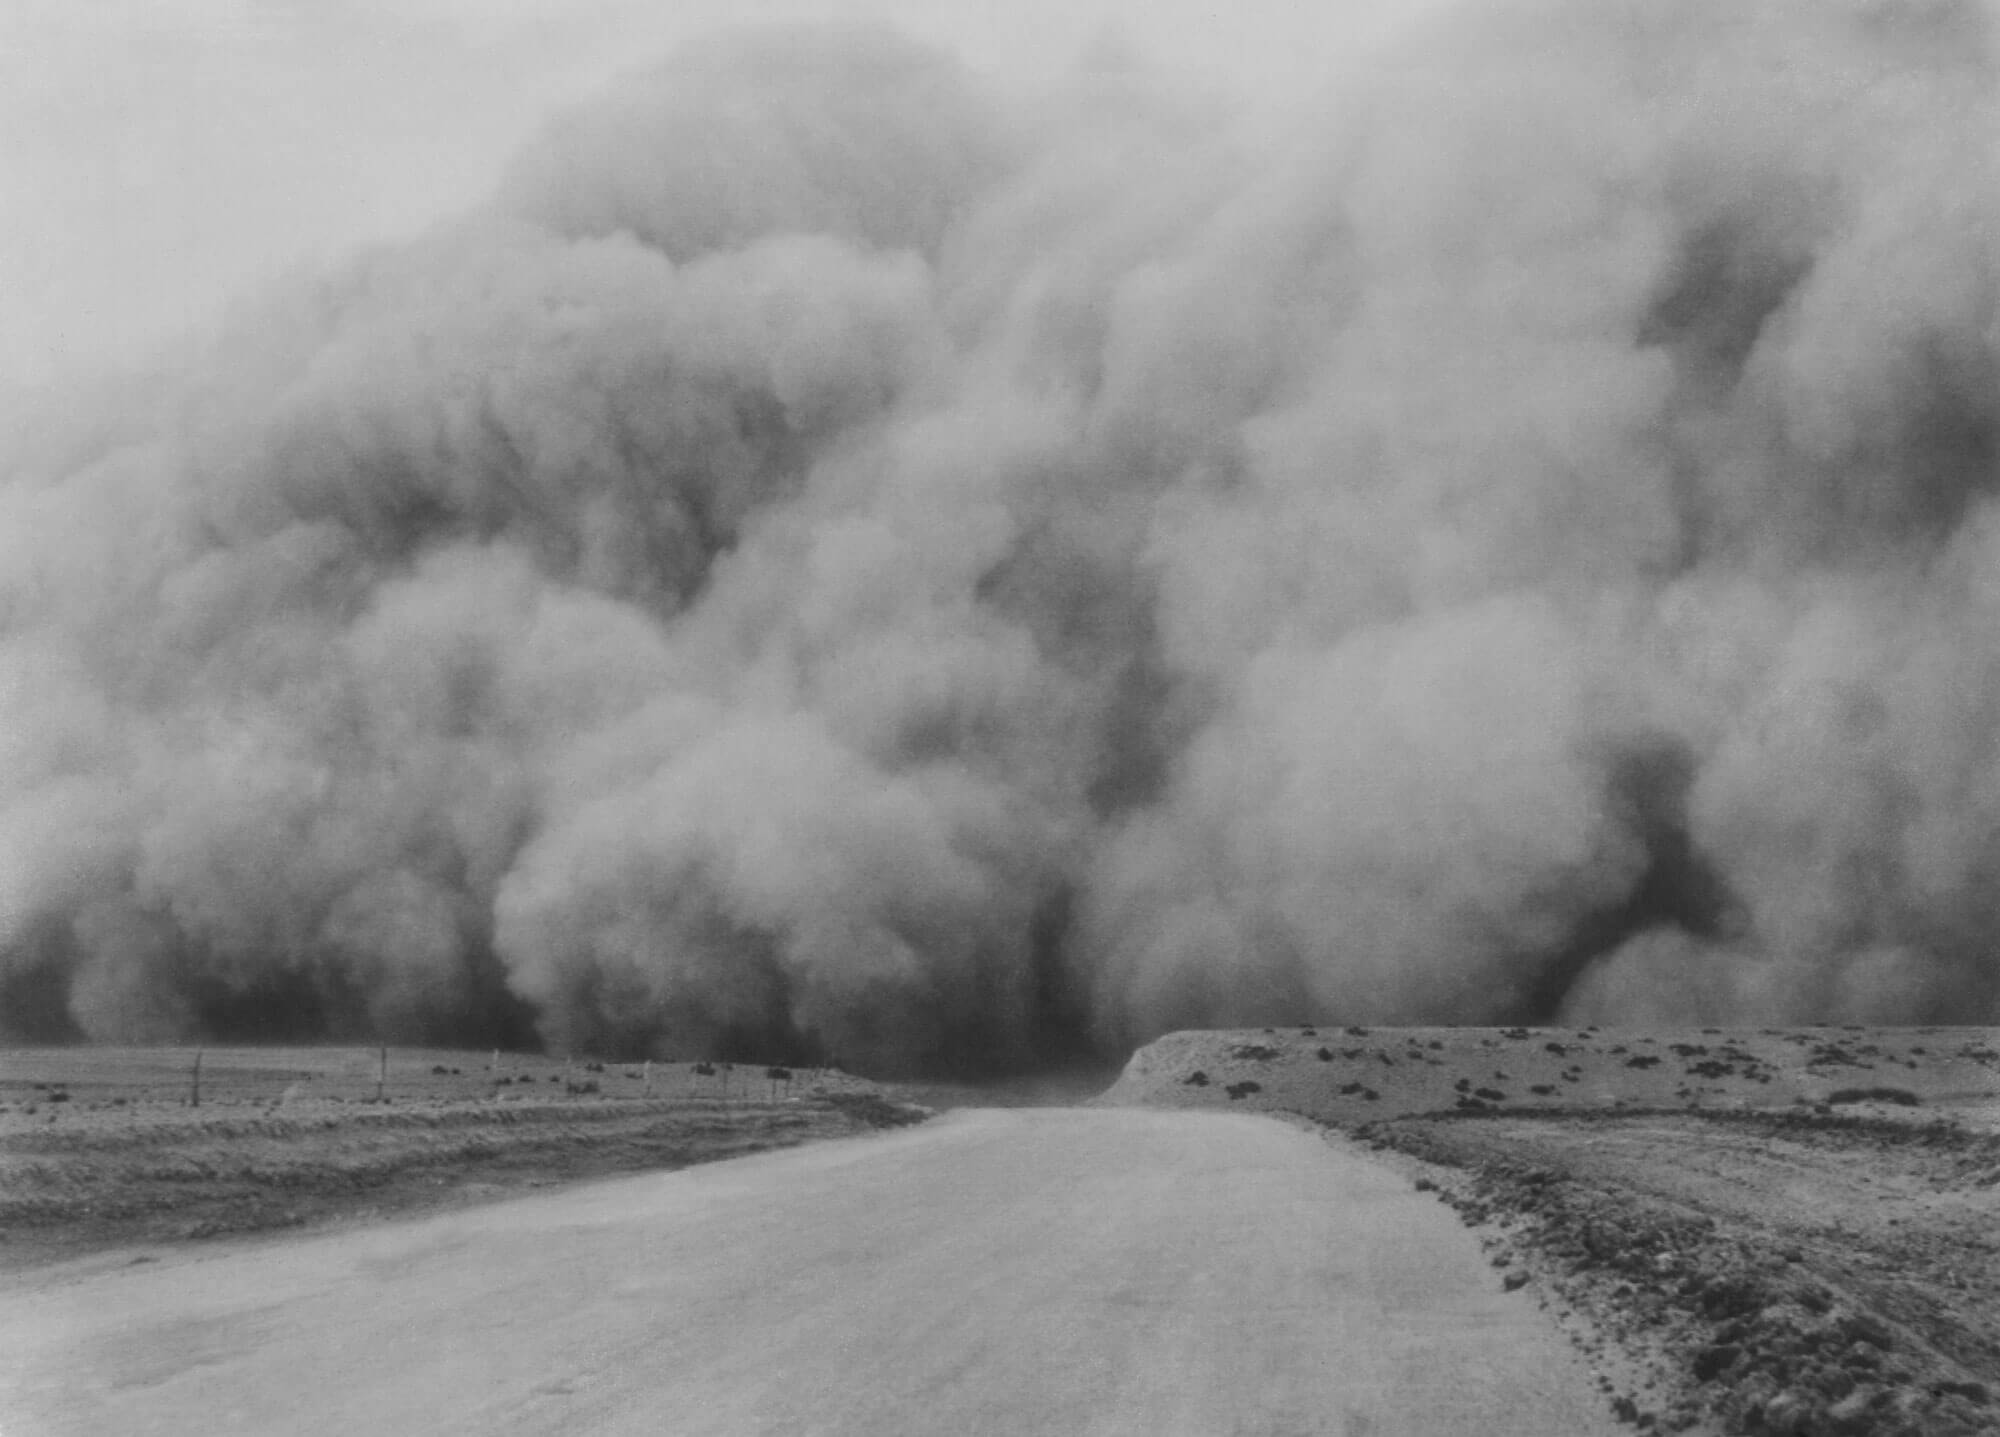 Cloud from the Dust Bowl